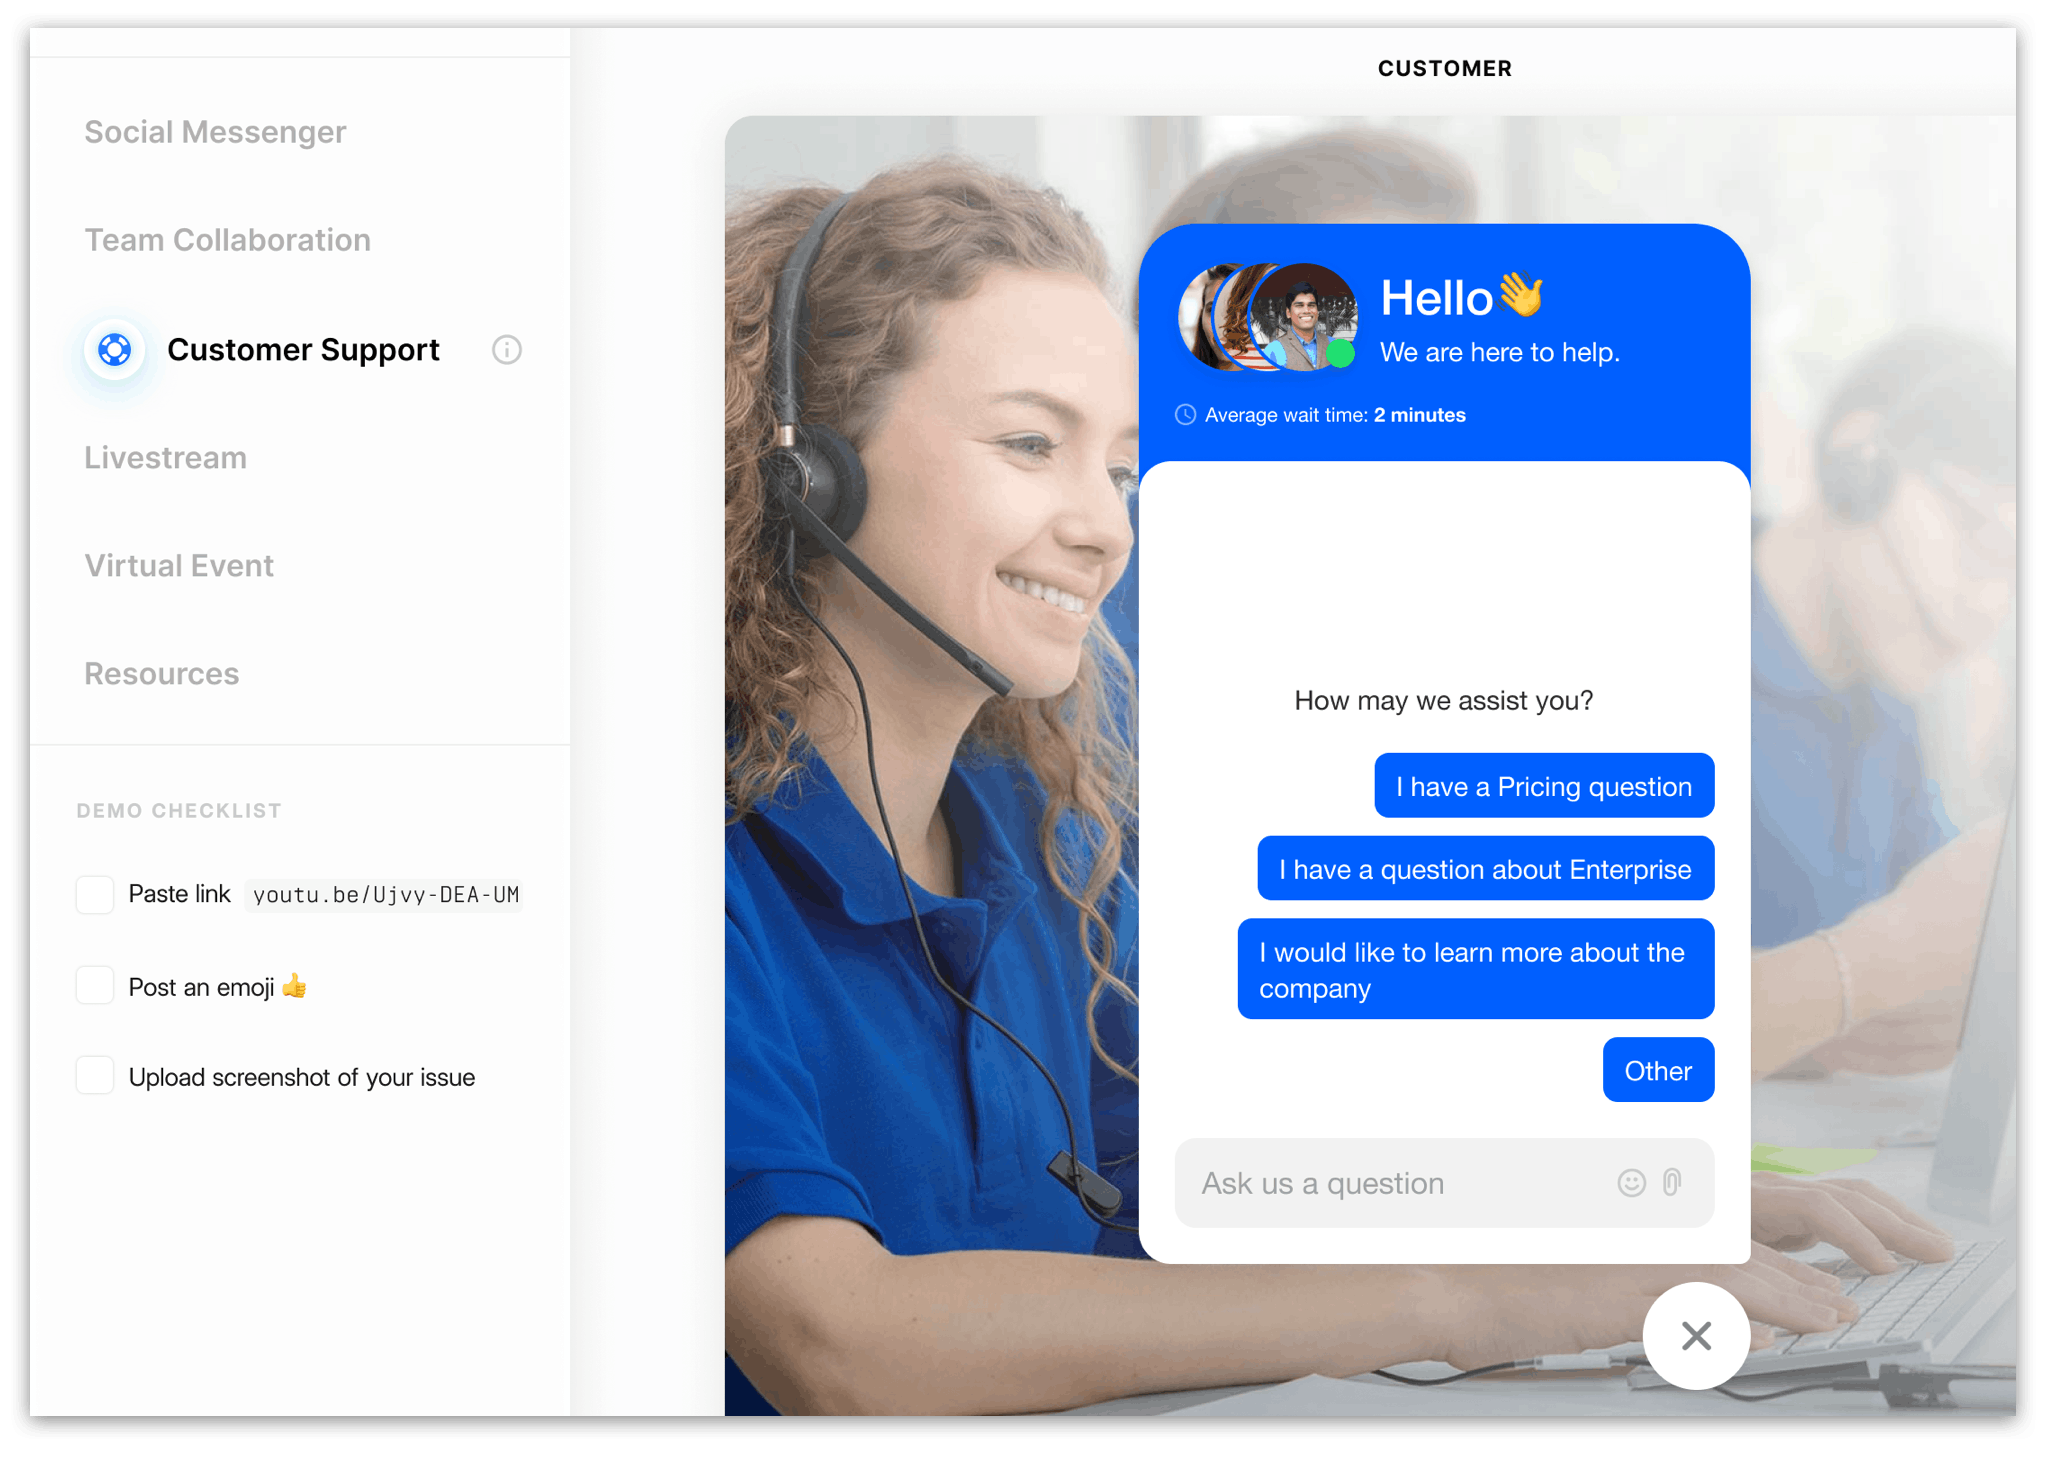 Live chat AI-powered bot helps users find information quickly